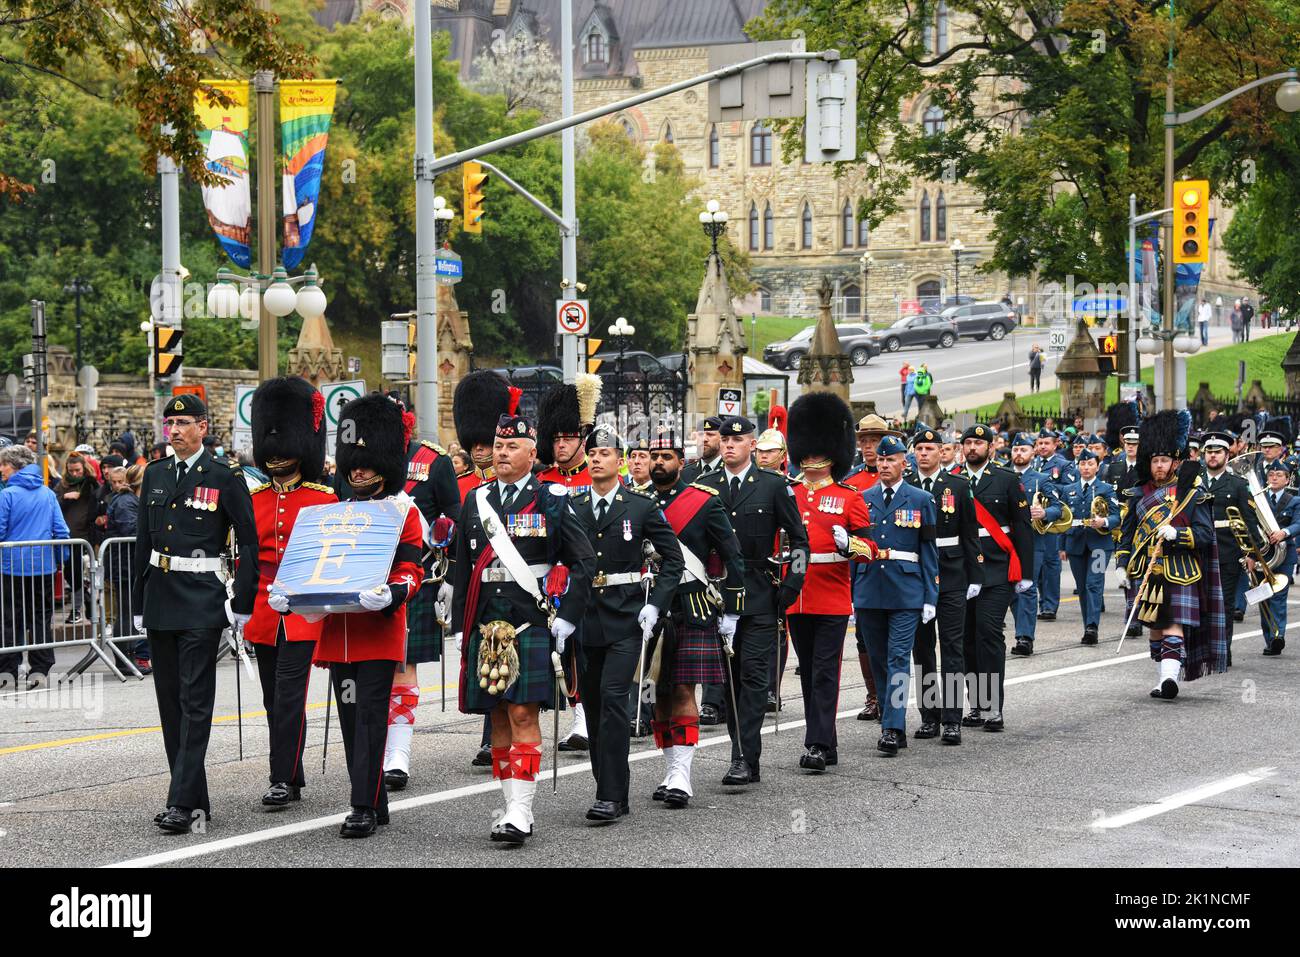 Ottawa, Canada - September 19, 2022: Members of Canadian military march during a memorial parade on Wellington Street heading towards Christ Cathedral an Anglican church for a commemorative ceremony for the funeral of Queen Elizabeth II. The federal government declared the day a federal holiday and a national day of mourning for the Queen, with federal public servants having the day off. Stock Photo